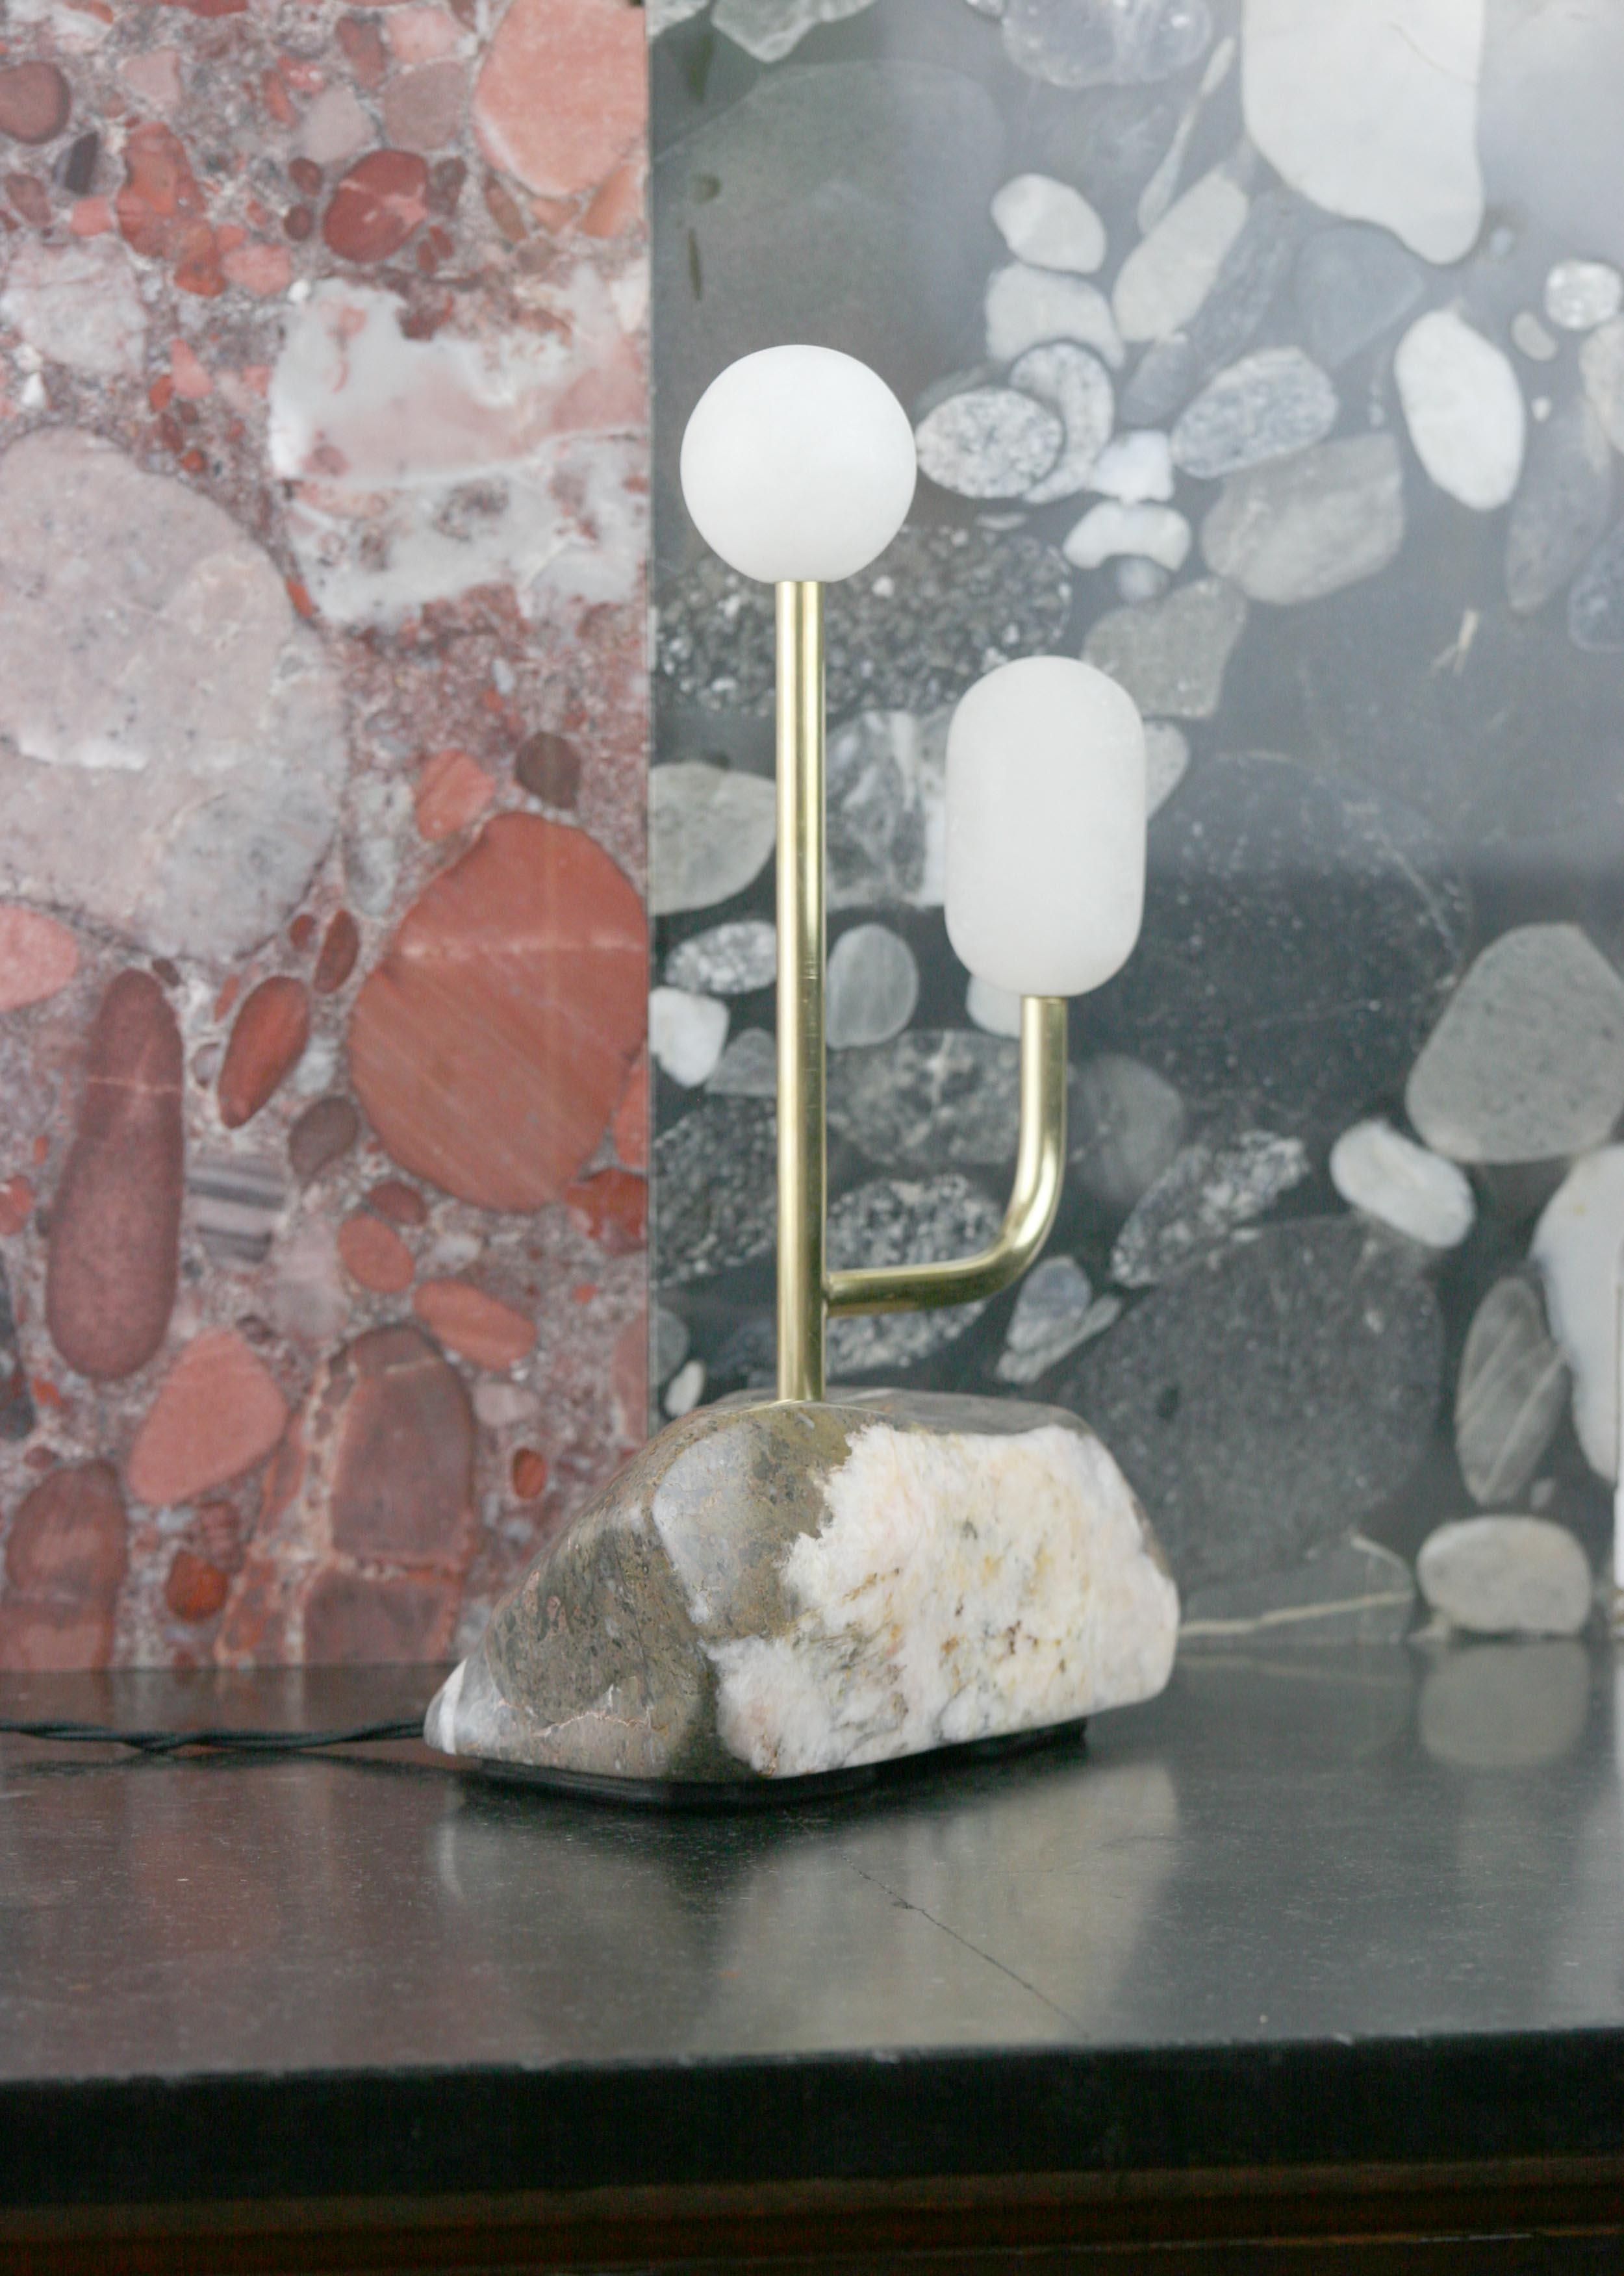 Marble lamp by Krzywda
Dimensions: 25L x 15D x 35H cm
Materials: Alabaster, marble, brass
Versions variable: Tulip, tear, oblong, sphere diffuser.

Individually handmade in France by Krzywda. Each marble base is sculpted by hand and varies from